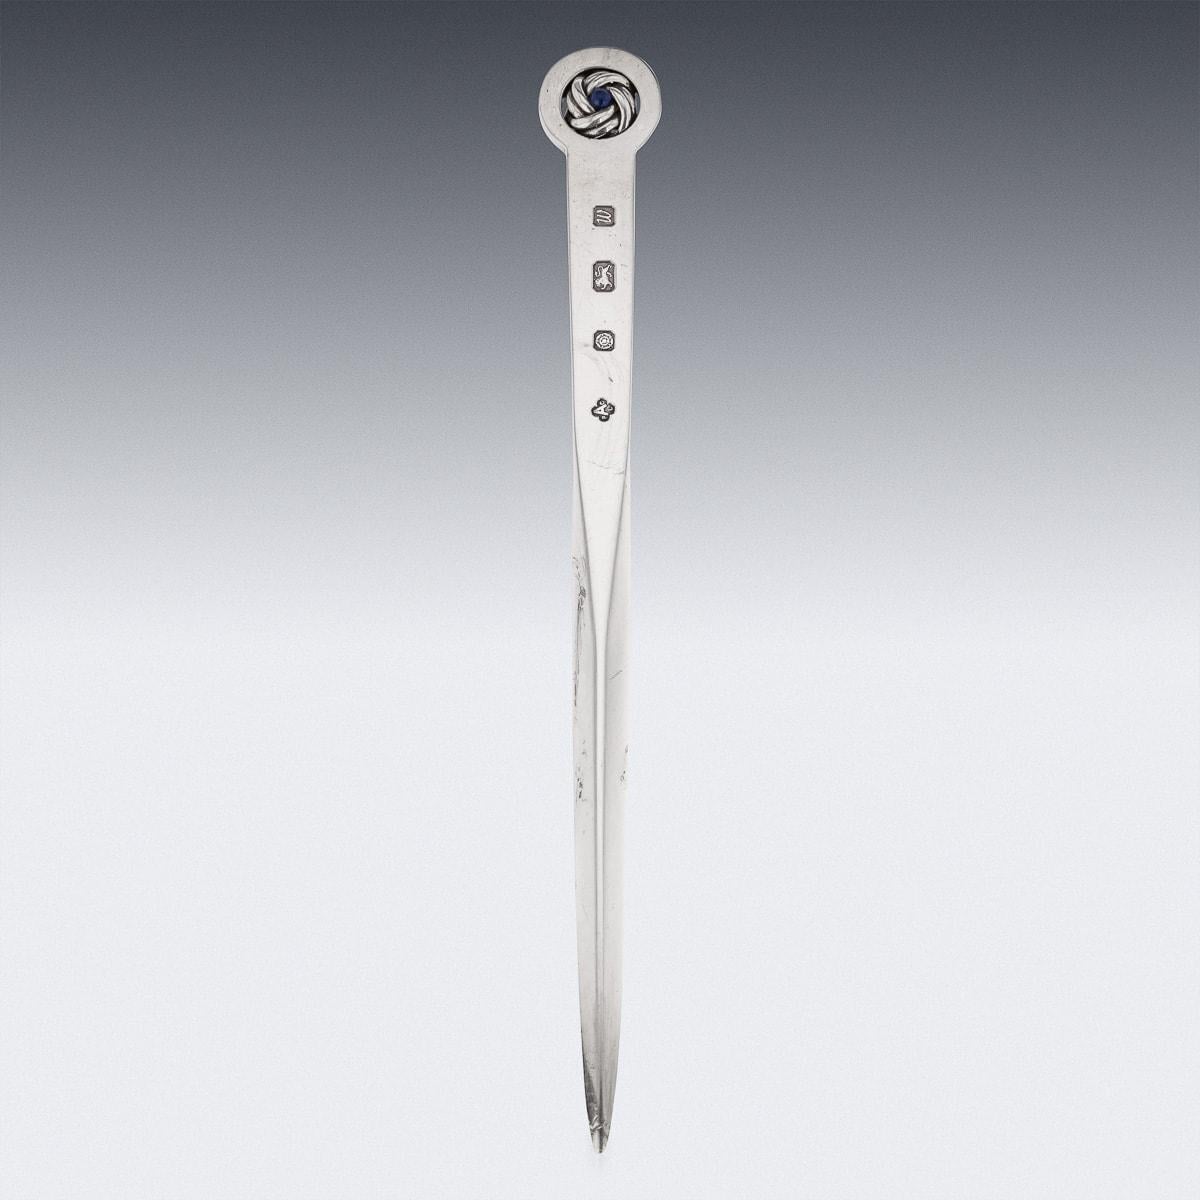 20th Century British solid silver letter opener, terminating with a woven silver decoration mounted with a lapiz cabochon, in its original retail case. Hallmarked English silver (925 standard), London, year 1996 (W), Maker A&CoLtd (Asprey & Co